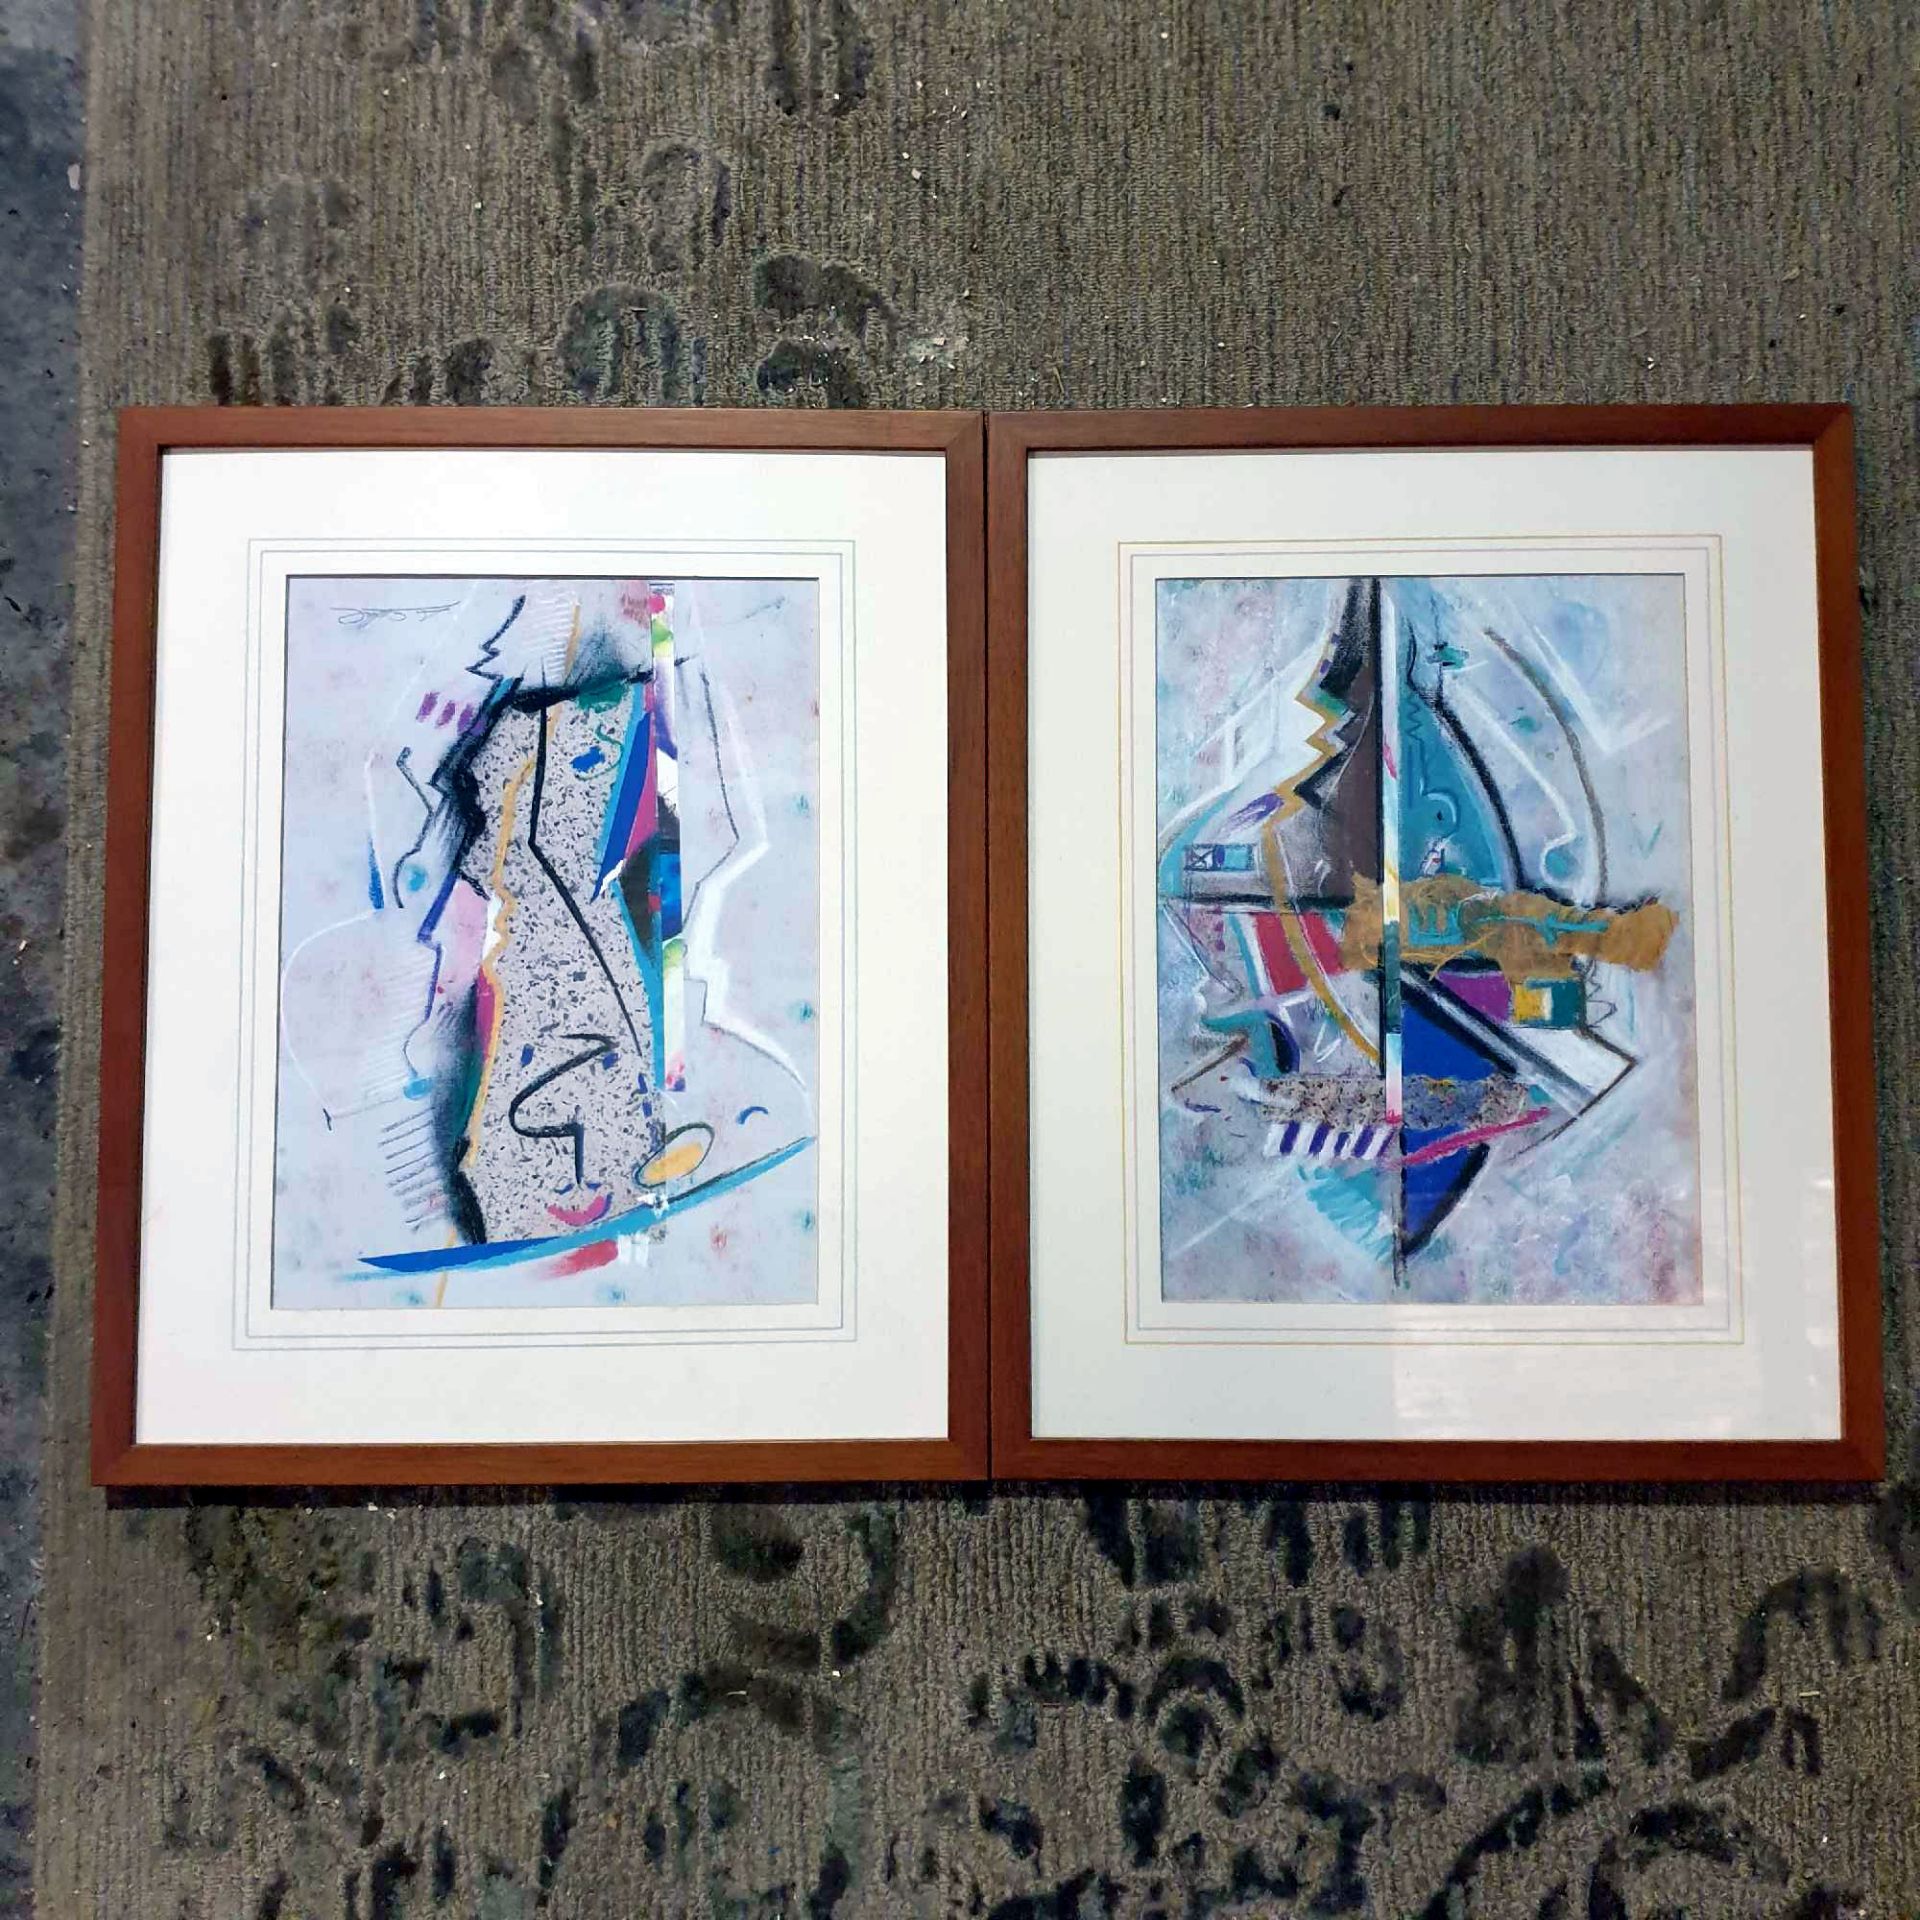 2 x Contemporary Prints After Alfred Gockel Glazed And Framed 43 x 53cm